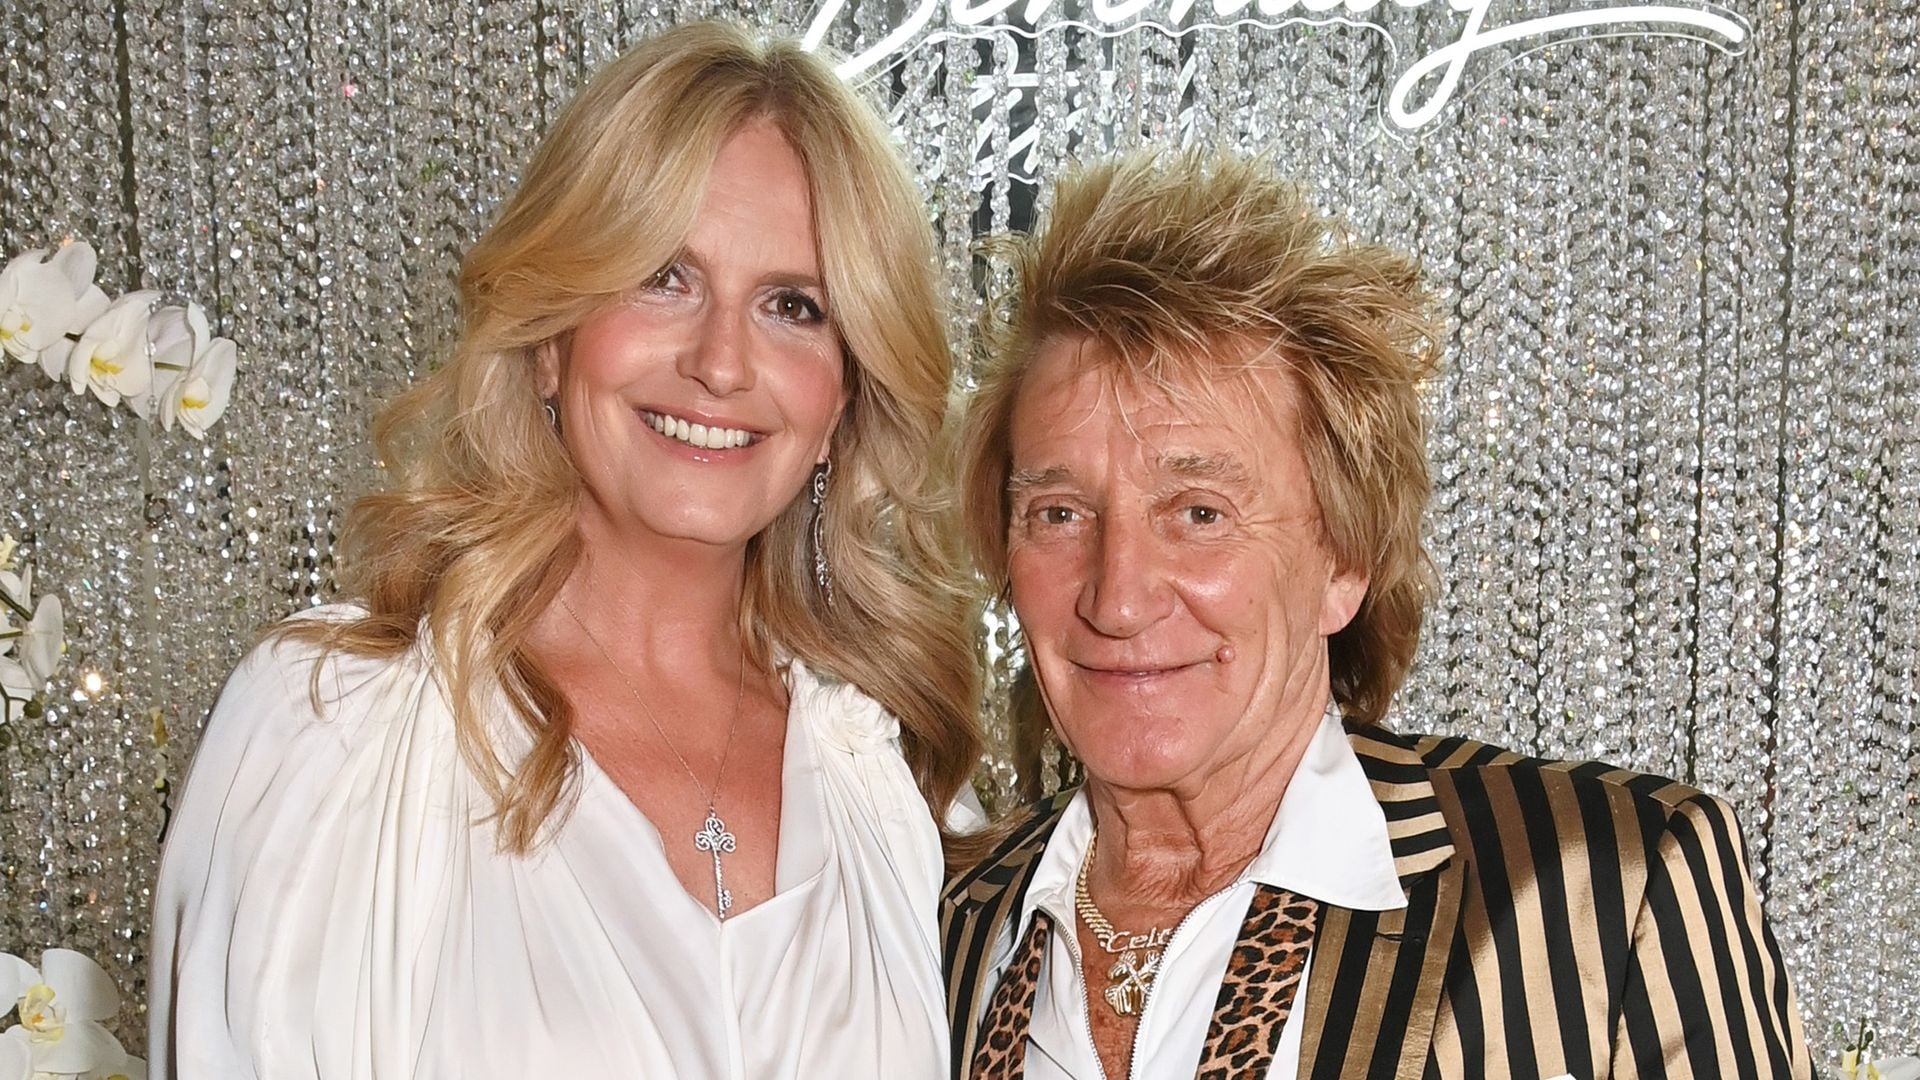 Penny Lancaster and Rod Stewart posing together